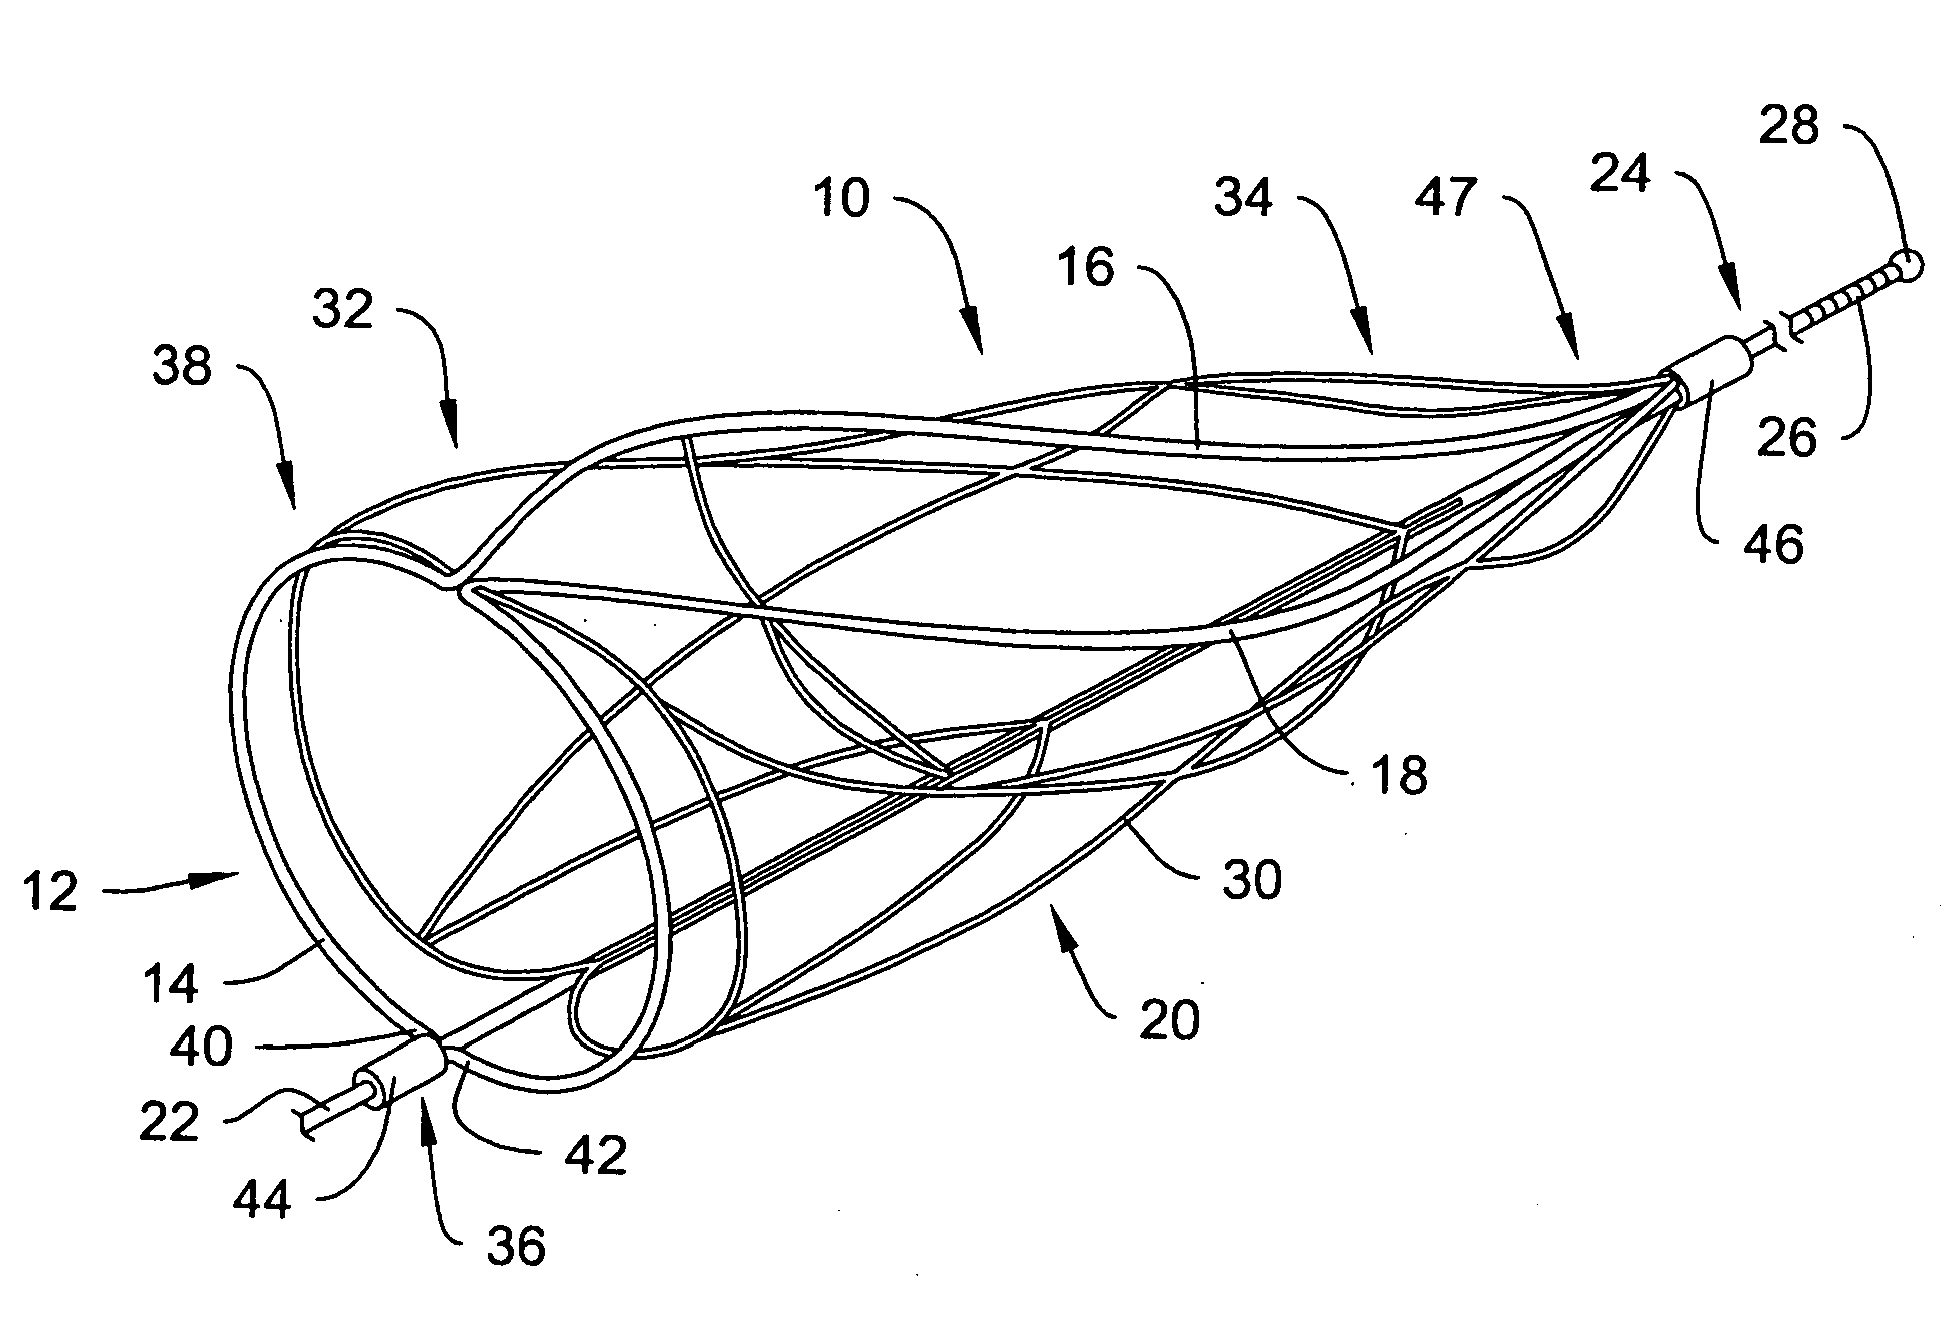 Embolectomy devices